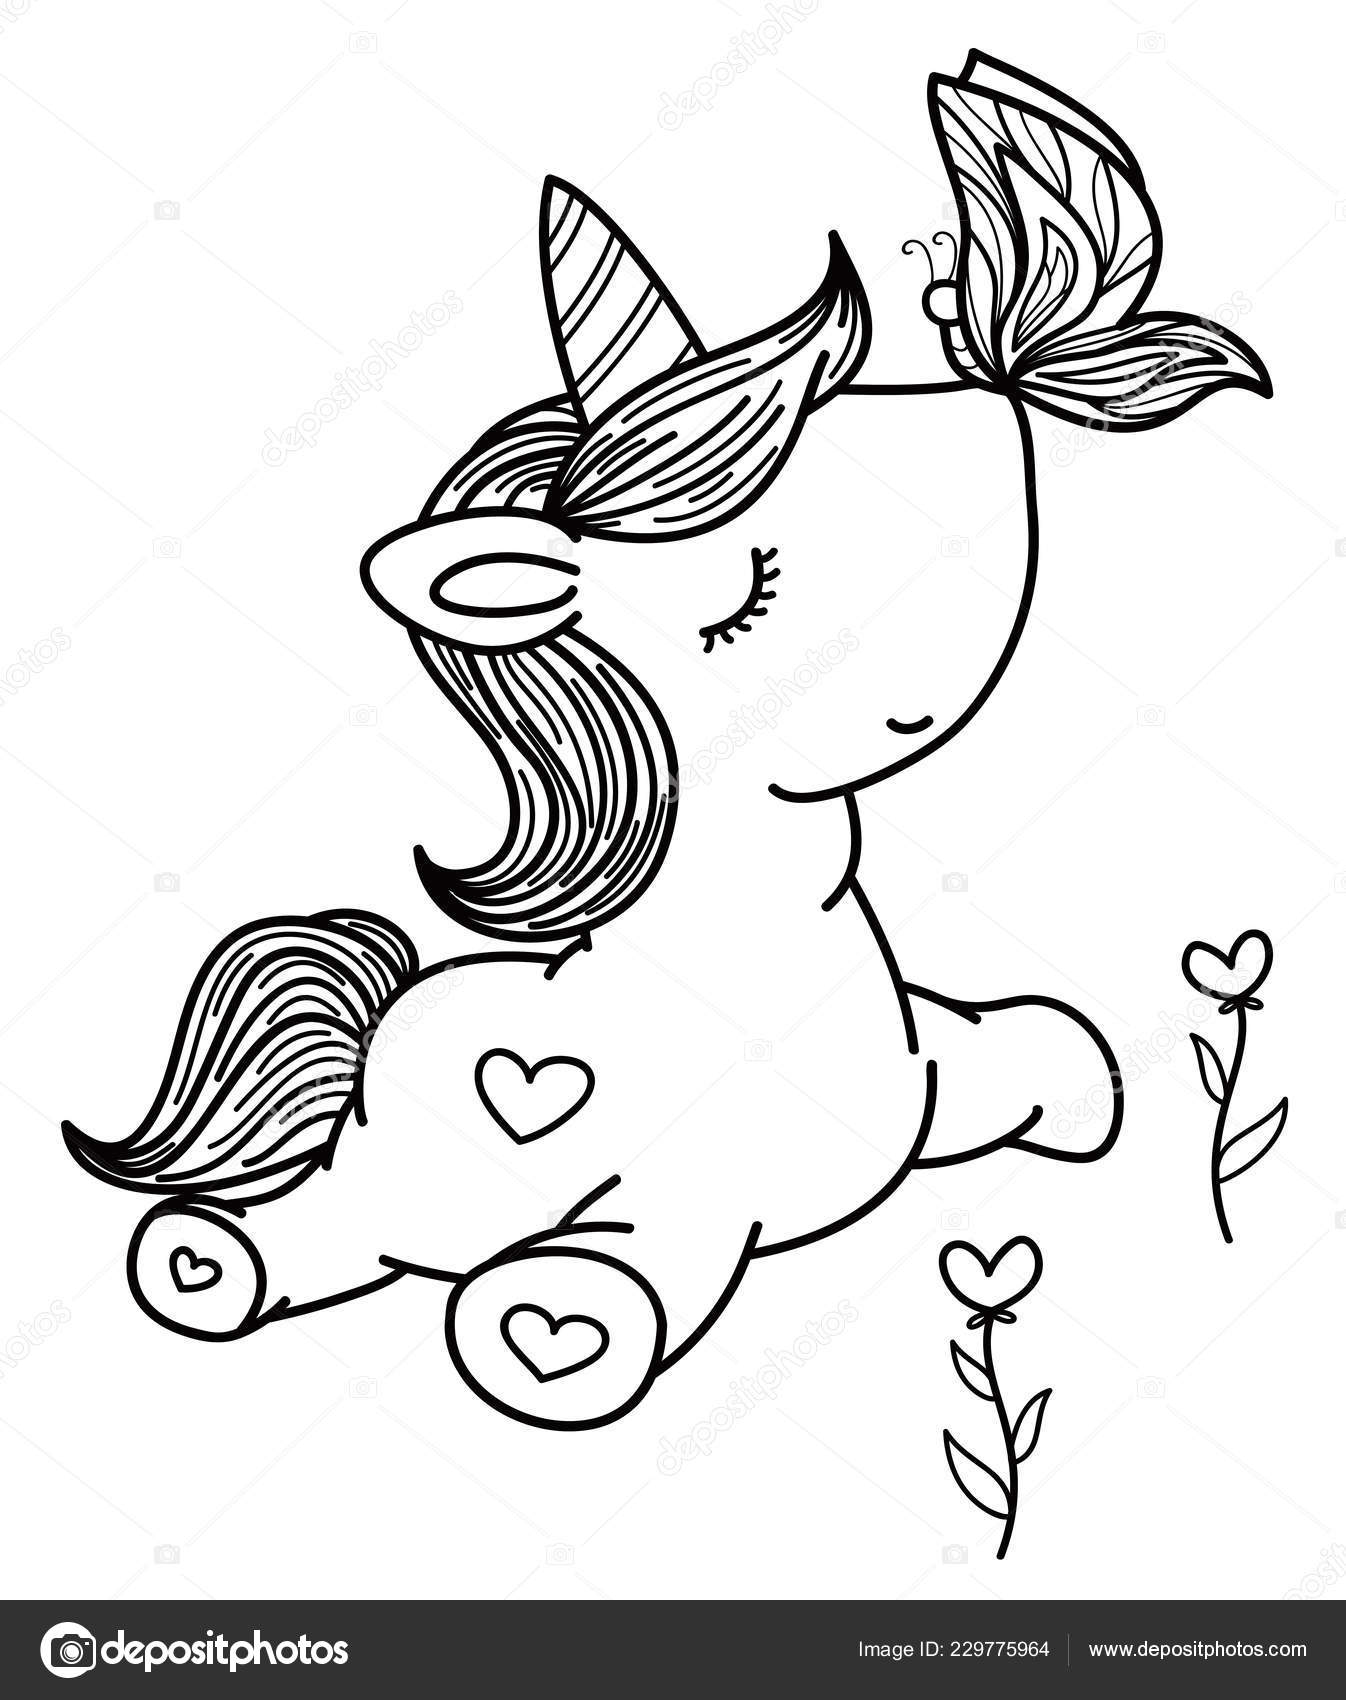 Cute Unicorn  Butterfly  Black Silhouettes Coloring   Stock 